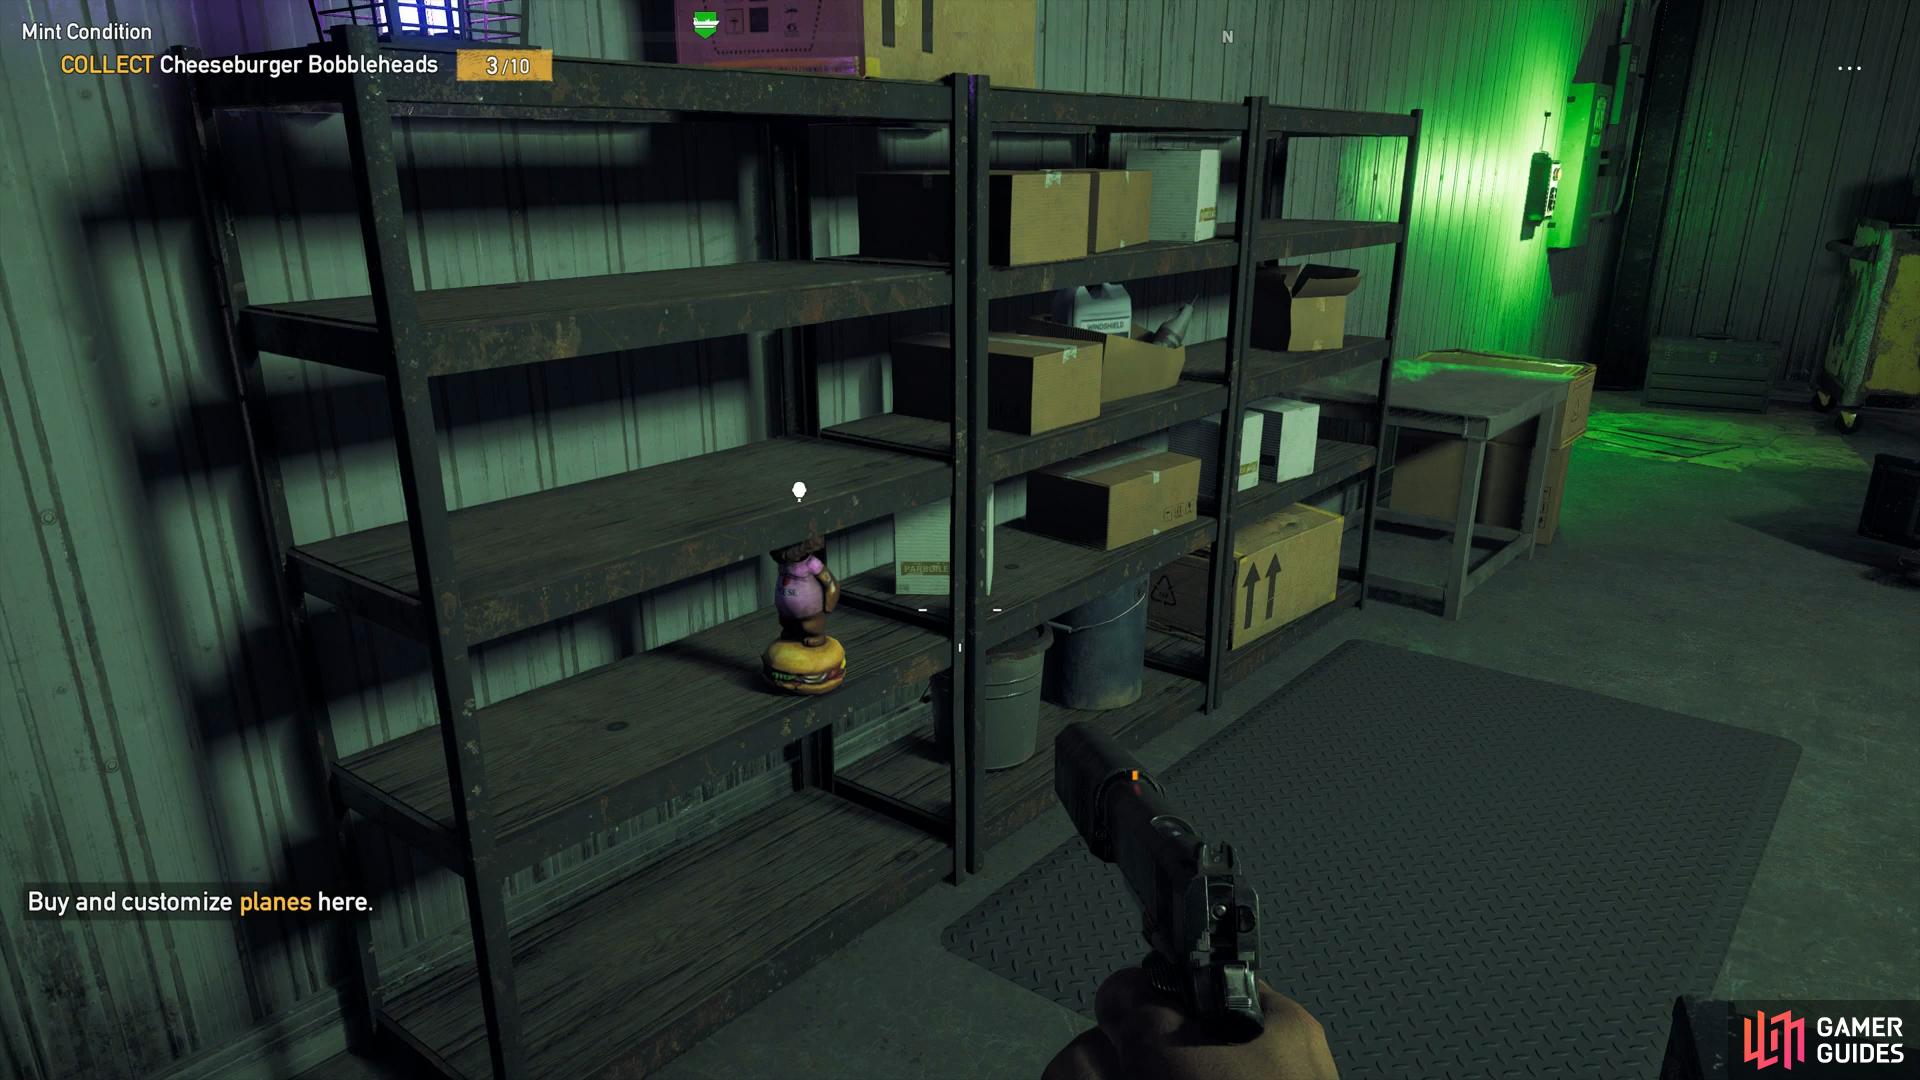 you'll need to complete the Hangar Pains Prepper Stash to gain access to the Bobblehead.